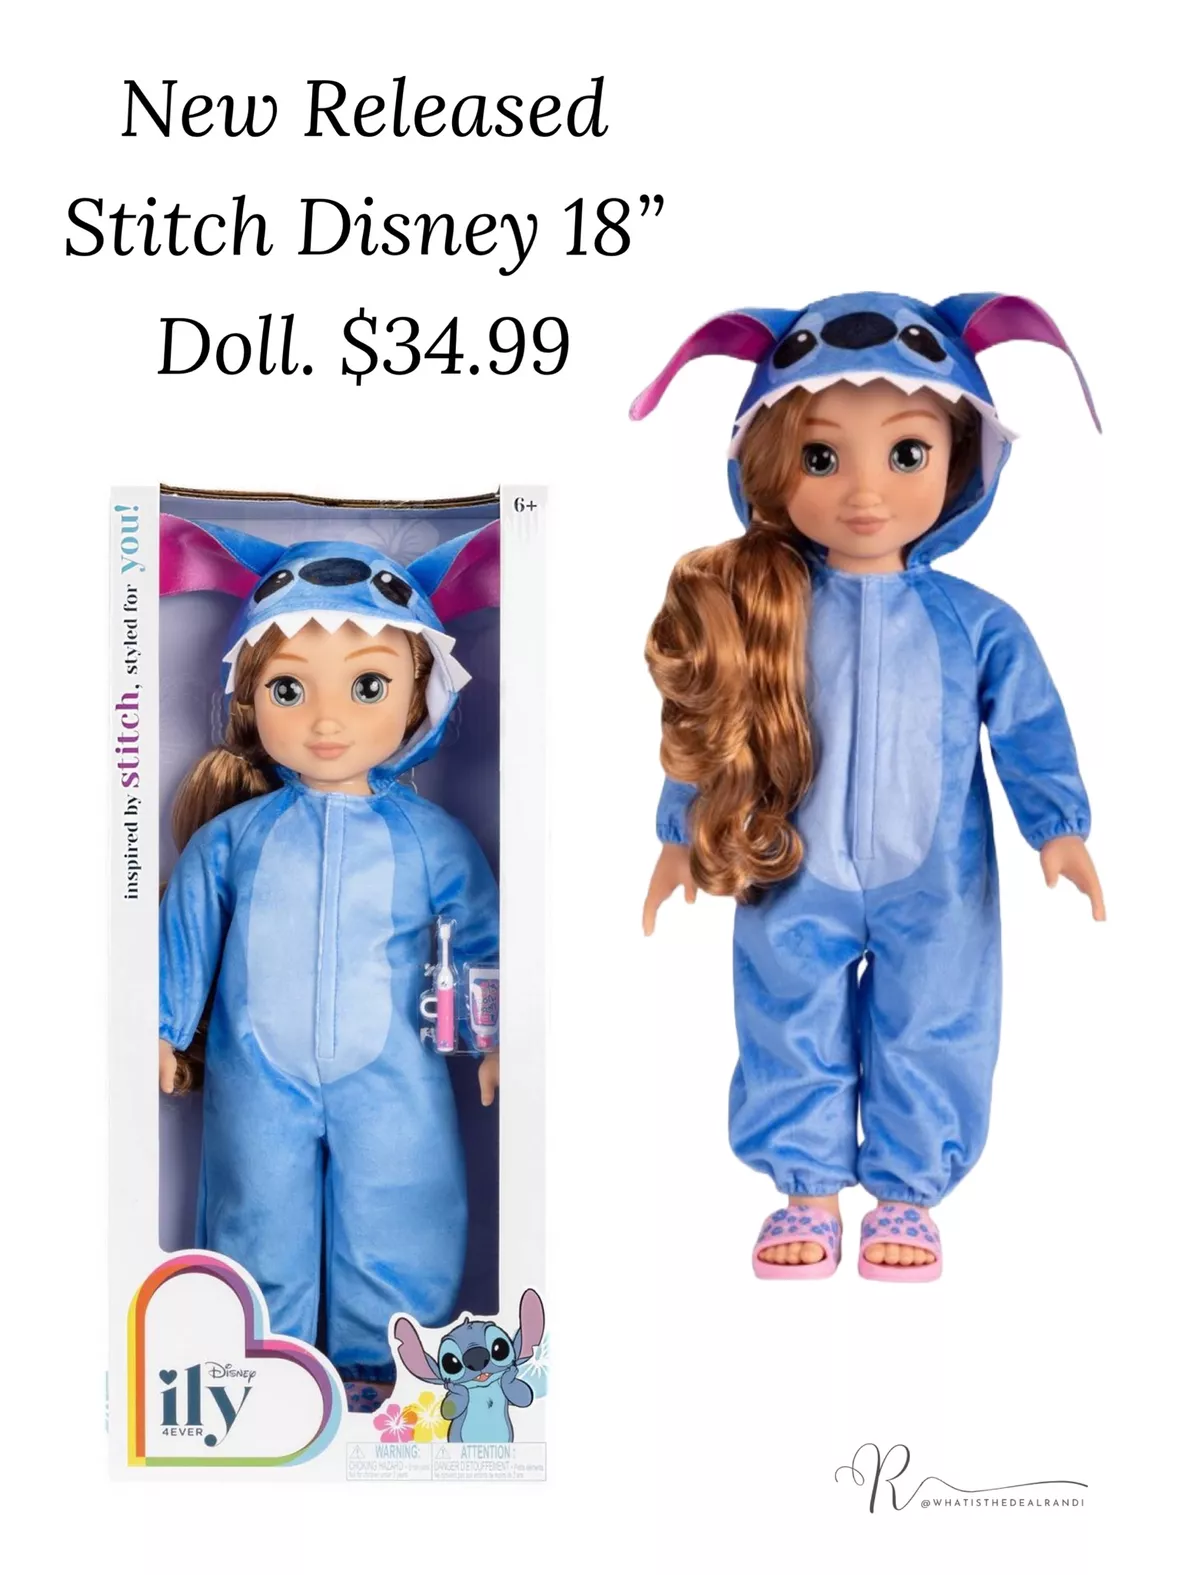 Disney ILY 4ever Stitch 18'' Doll Strawberry Blonde Hair (Target Exclusive)  NEW!